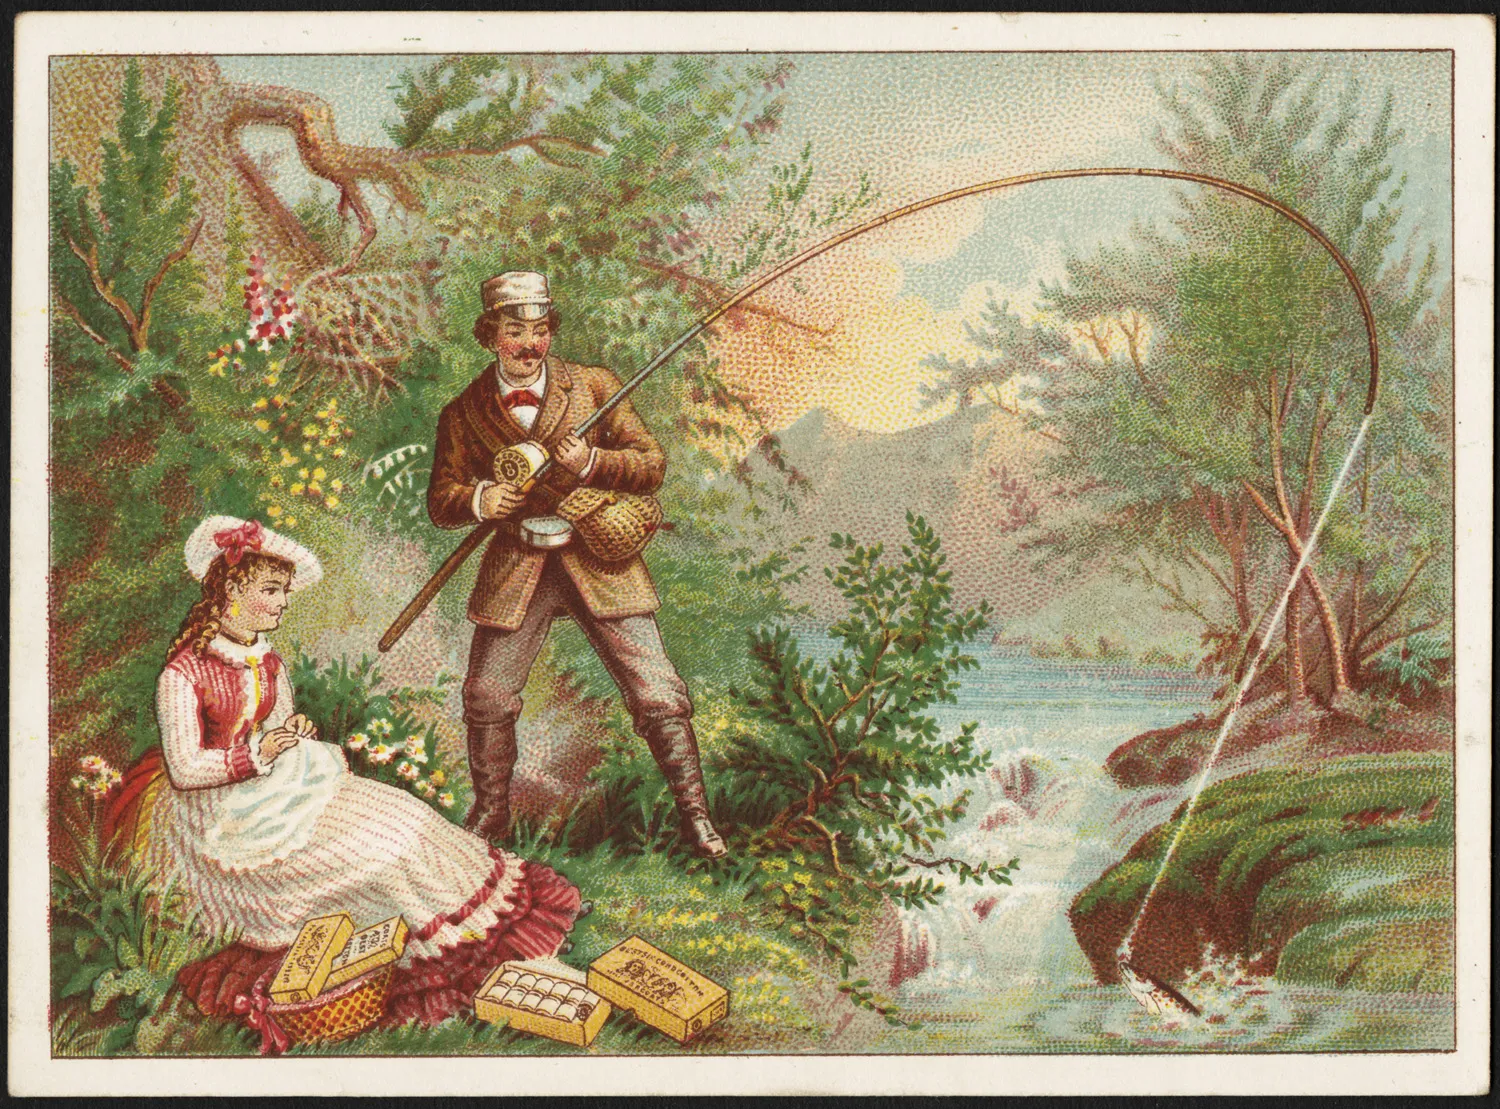 Photo showing: File name: 10_03_002261a
Binder label: Thread
Title: 1880, J. & P. Coats' best six cord spool cotton. [front]
Created/Published: Five Points, N. Y. : Donaldson Brothers
Date issued: 1870 - 1900 (approximate)
Physical description: 1 print : chromolithograph ; 9 x 12 cm.
Genre: Advertising cards
Subject: Adults; Thread; Fishing & hunting gear; Rivers; Cotton
Notes: Title from item.
Collection: 19th Century American Trade Cards
Location: Boston Public Library, Print Department

Rights: No known restrictions.